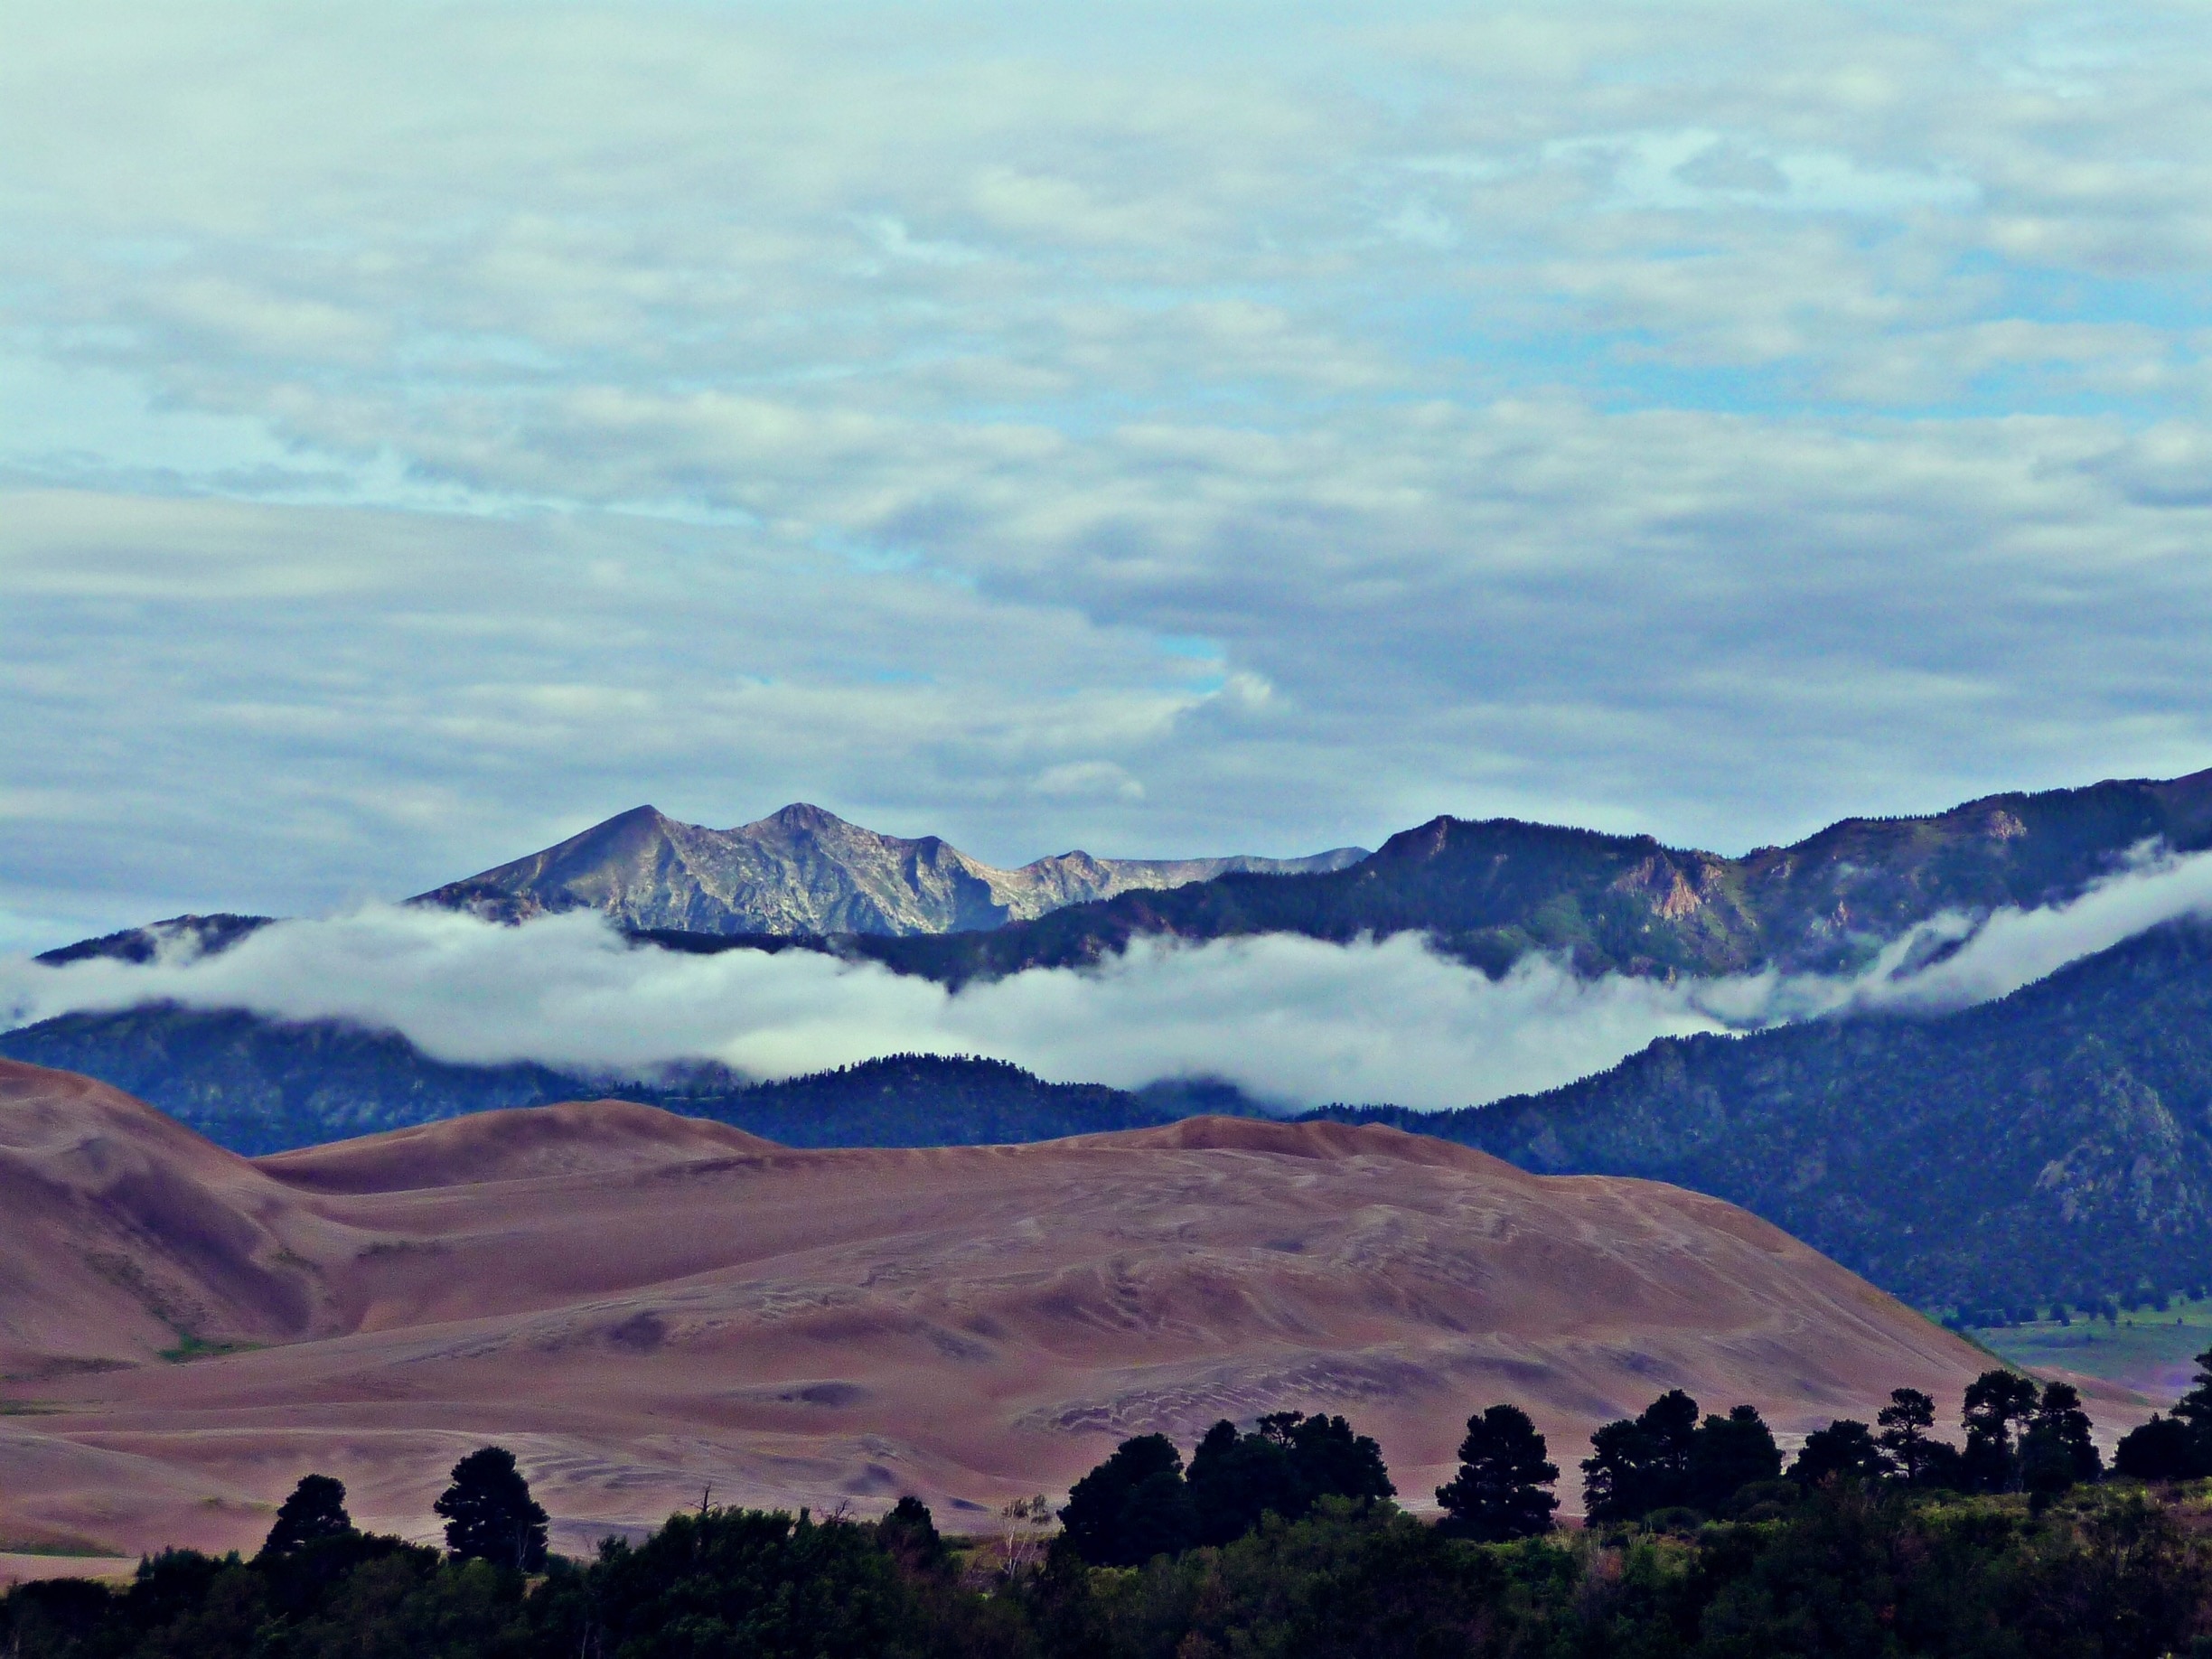 Alluring view of Sangre de Cristo mountains and the Great Sand Dunes. July 2014
